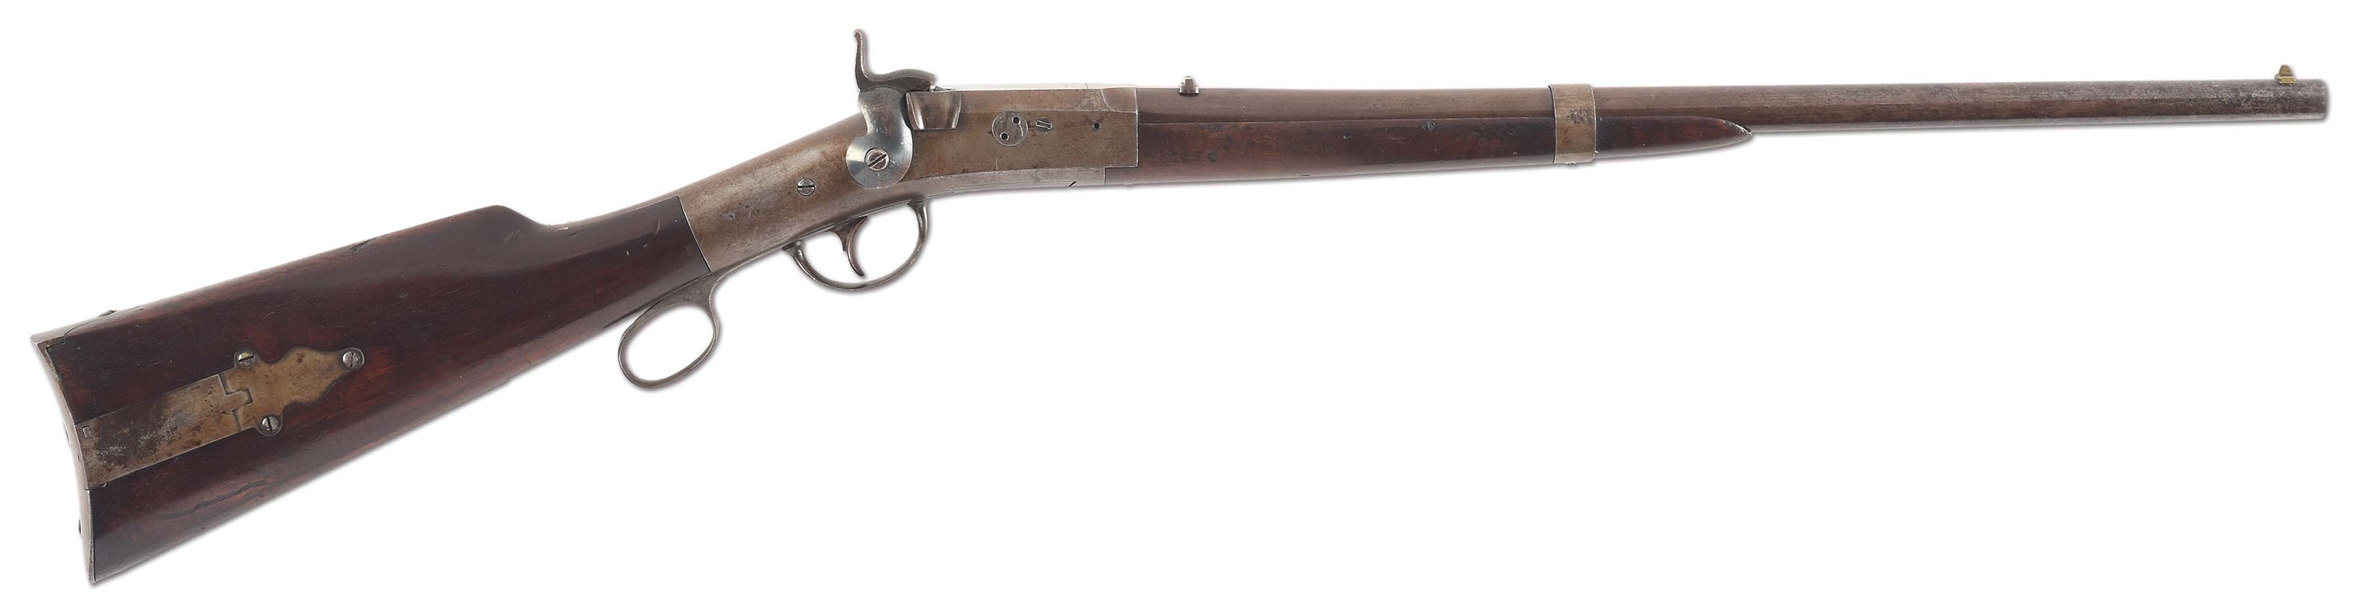 (A) RARE VARIATION OF A PERRY NAVY CARBINE.